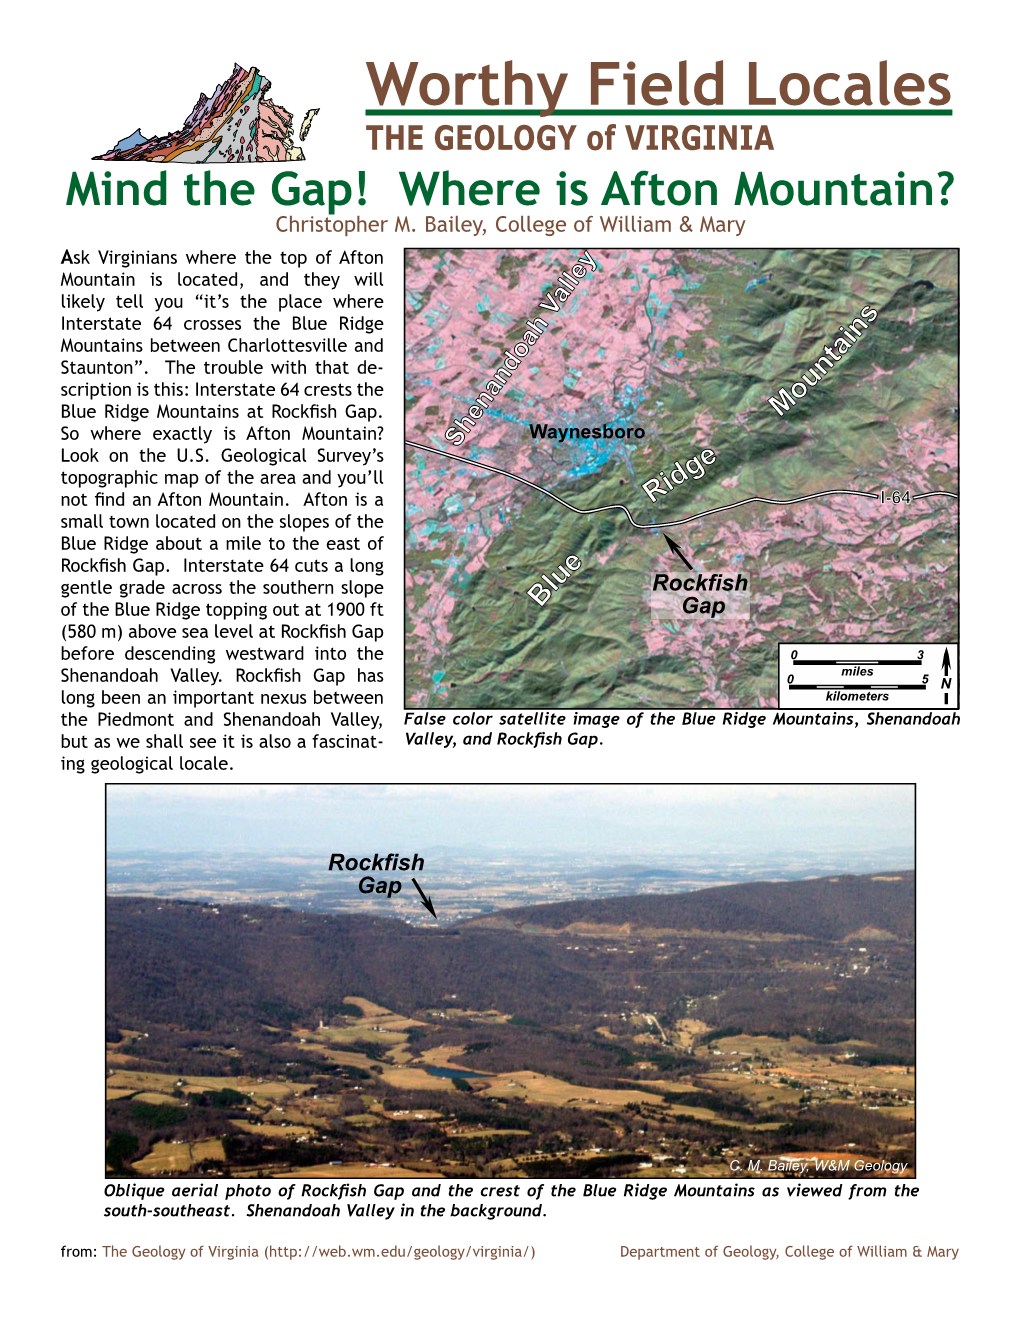 Where Is Afton Mountain? Christopher M